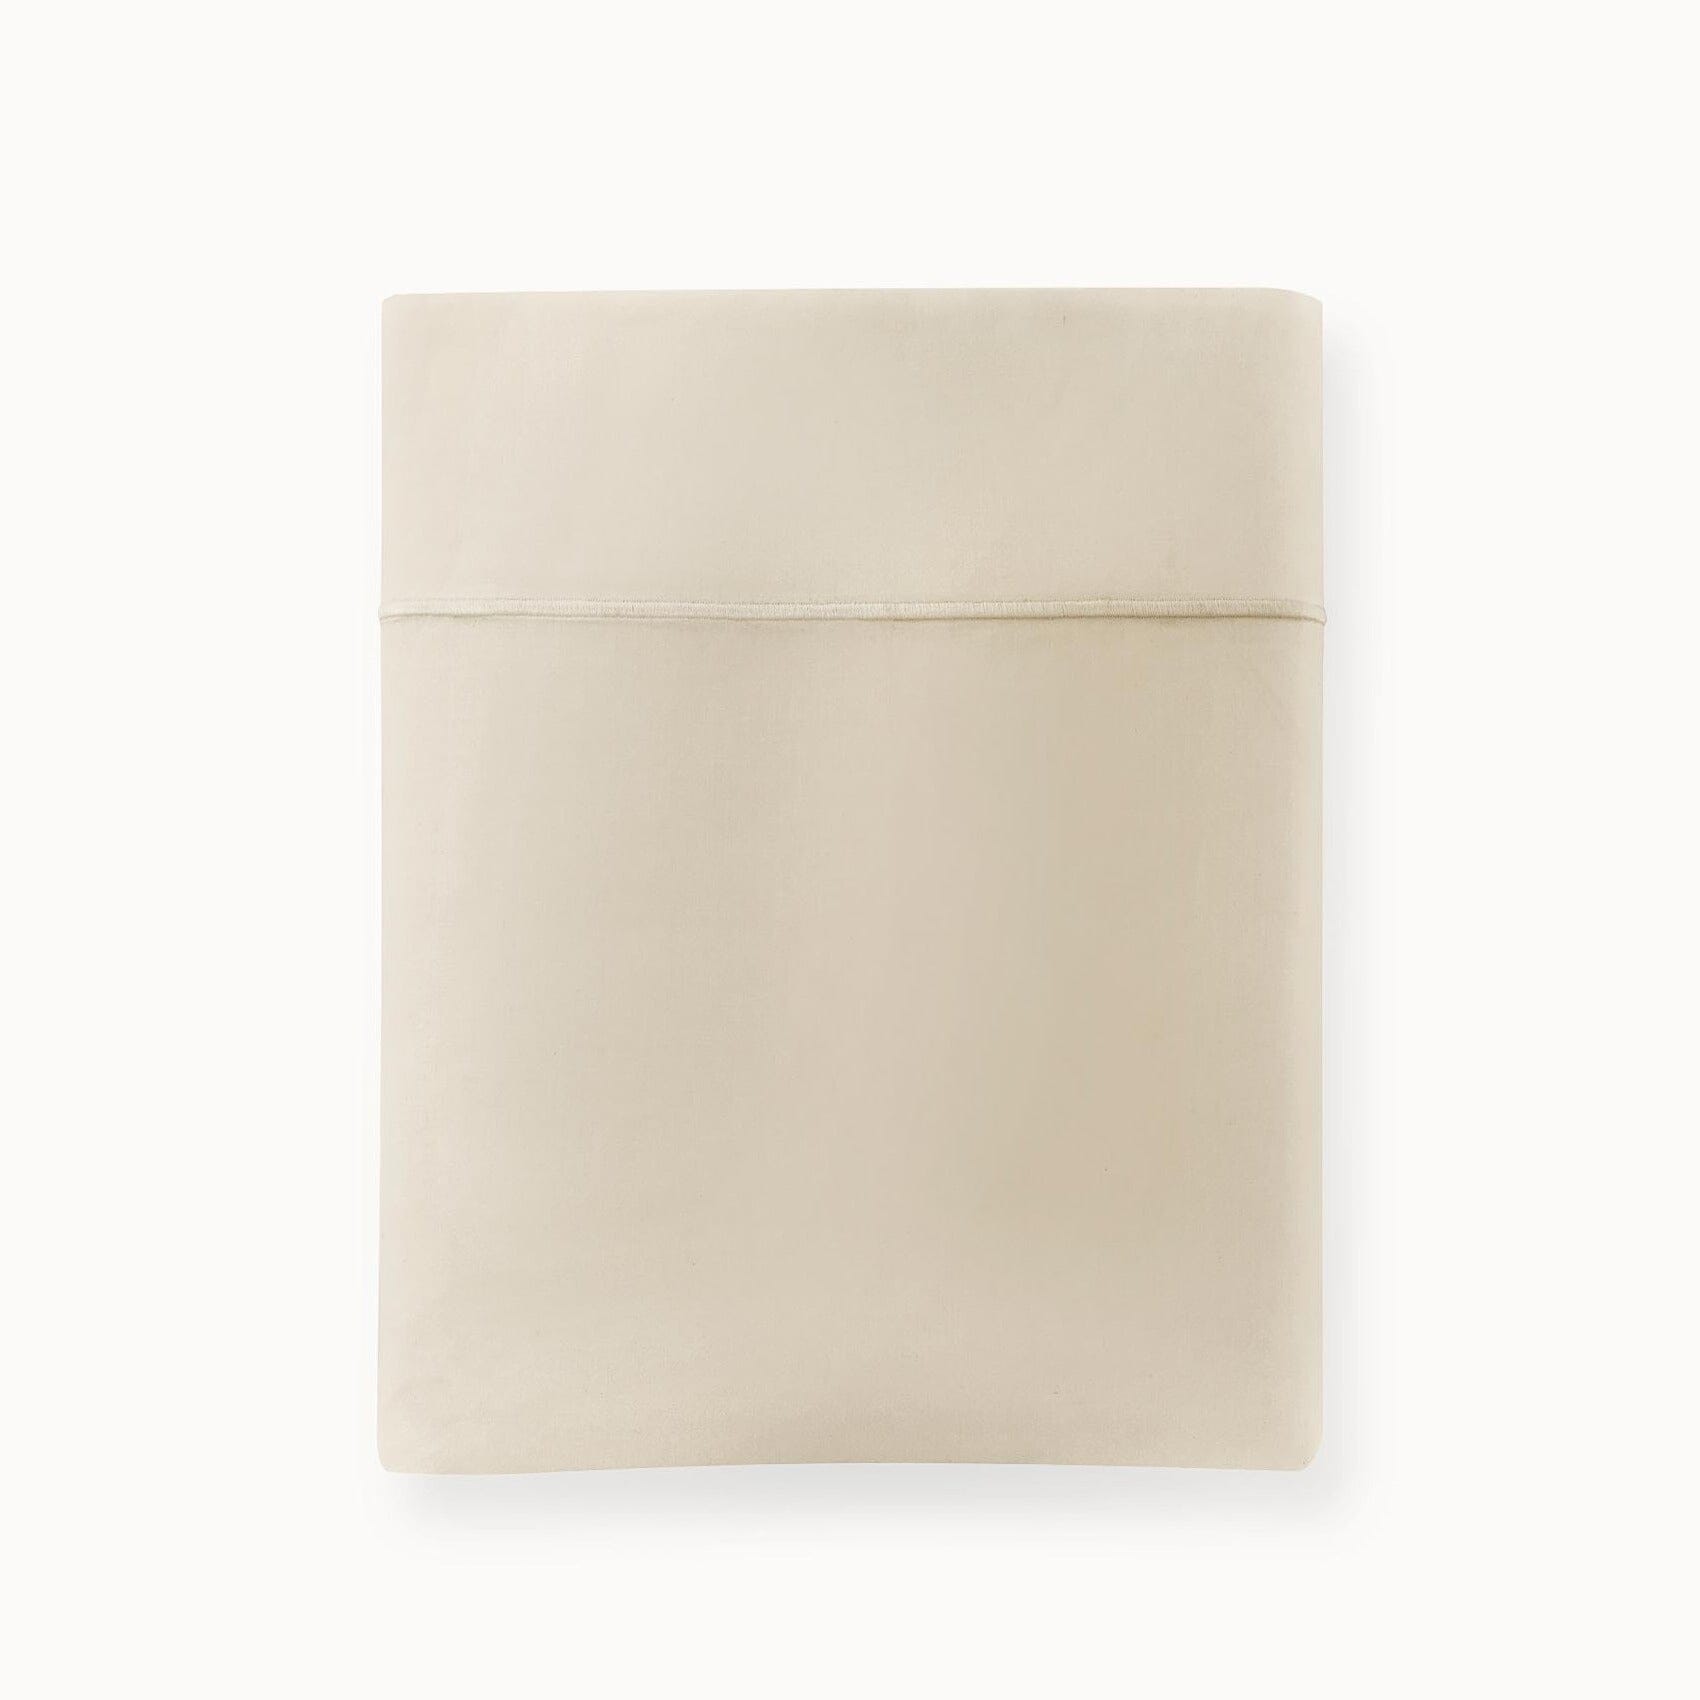 Flat Sheet - Soprano Linen Bedding - Peacock Alley Cotton Sateen at Fig Linens and Home